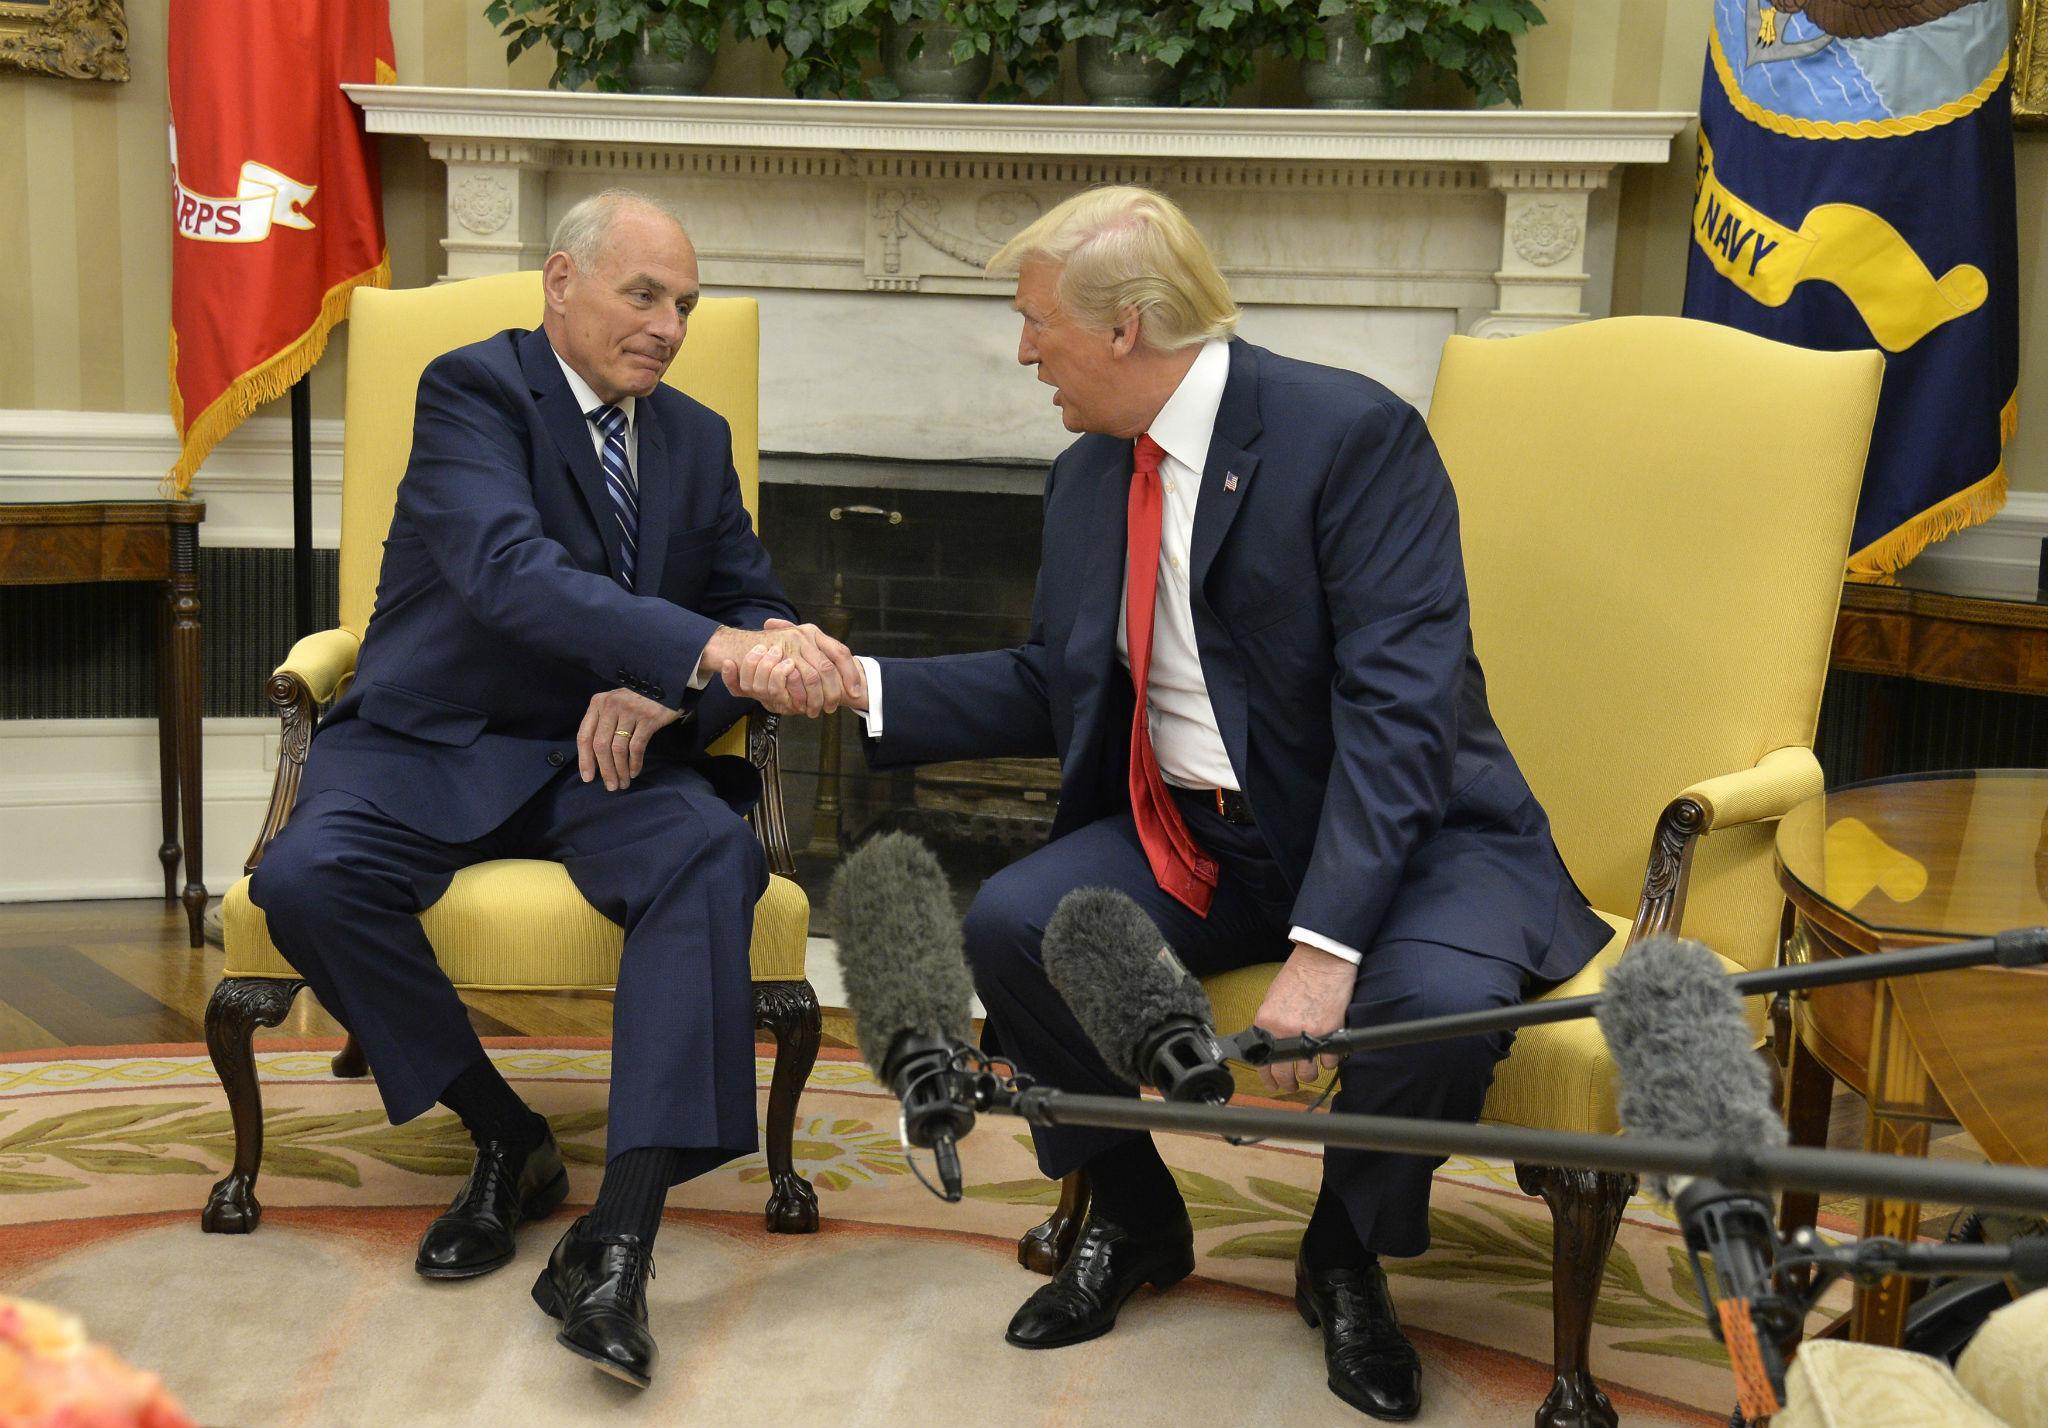 Donald Trump and White House Chief of Staff John Kelly